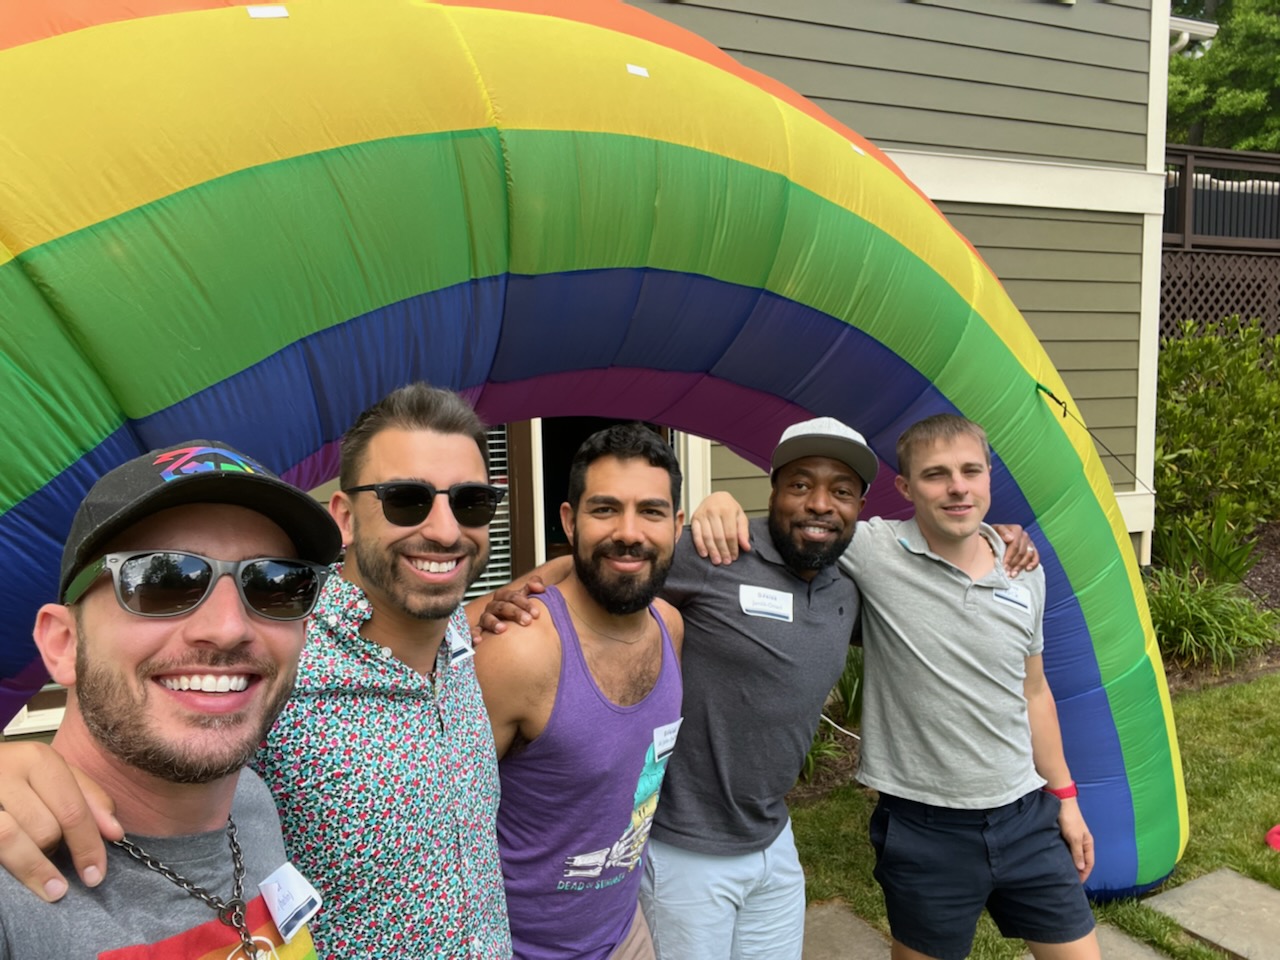 Five men smile for a photo in front of an inflatable rainbow.